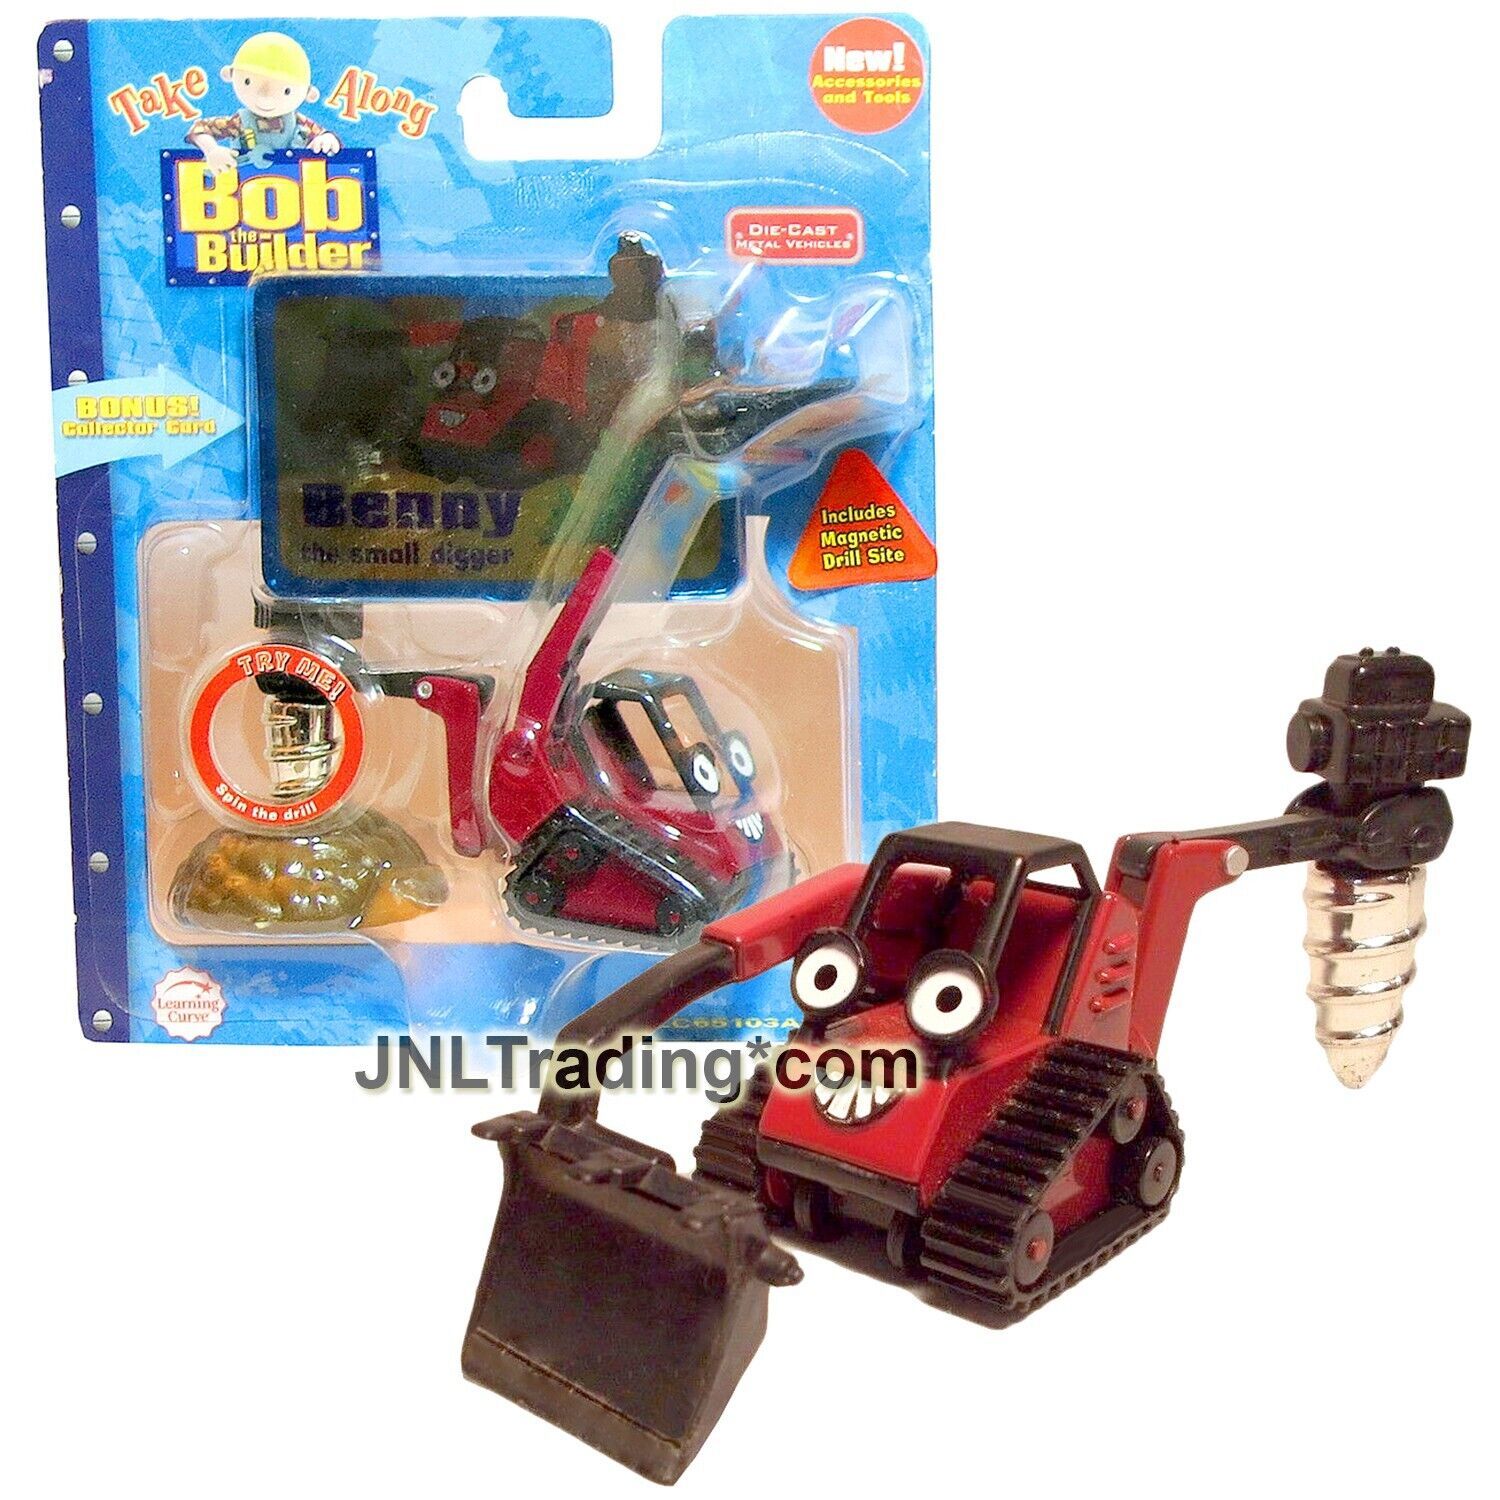 Primary image for Yr 2006 Bob the Builder Take Along Die Cast - BENNY Small Digger Magnetic Drill